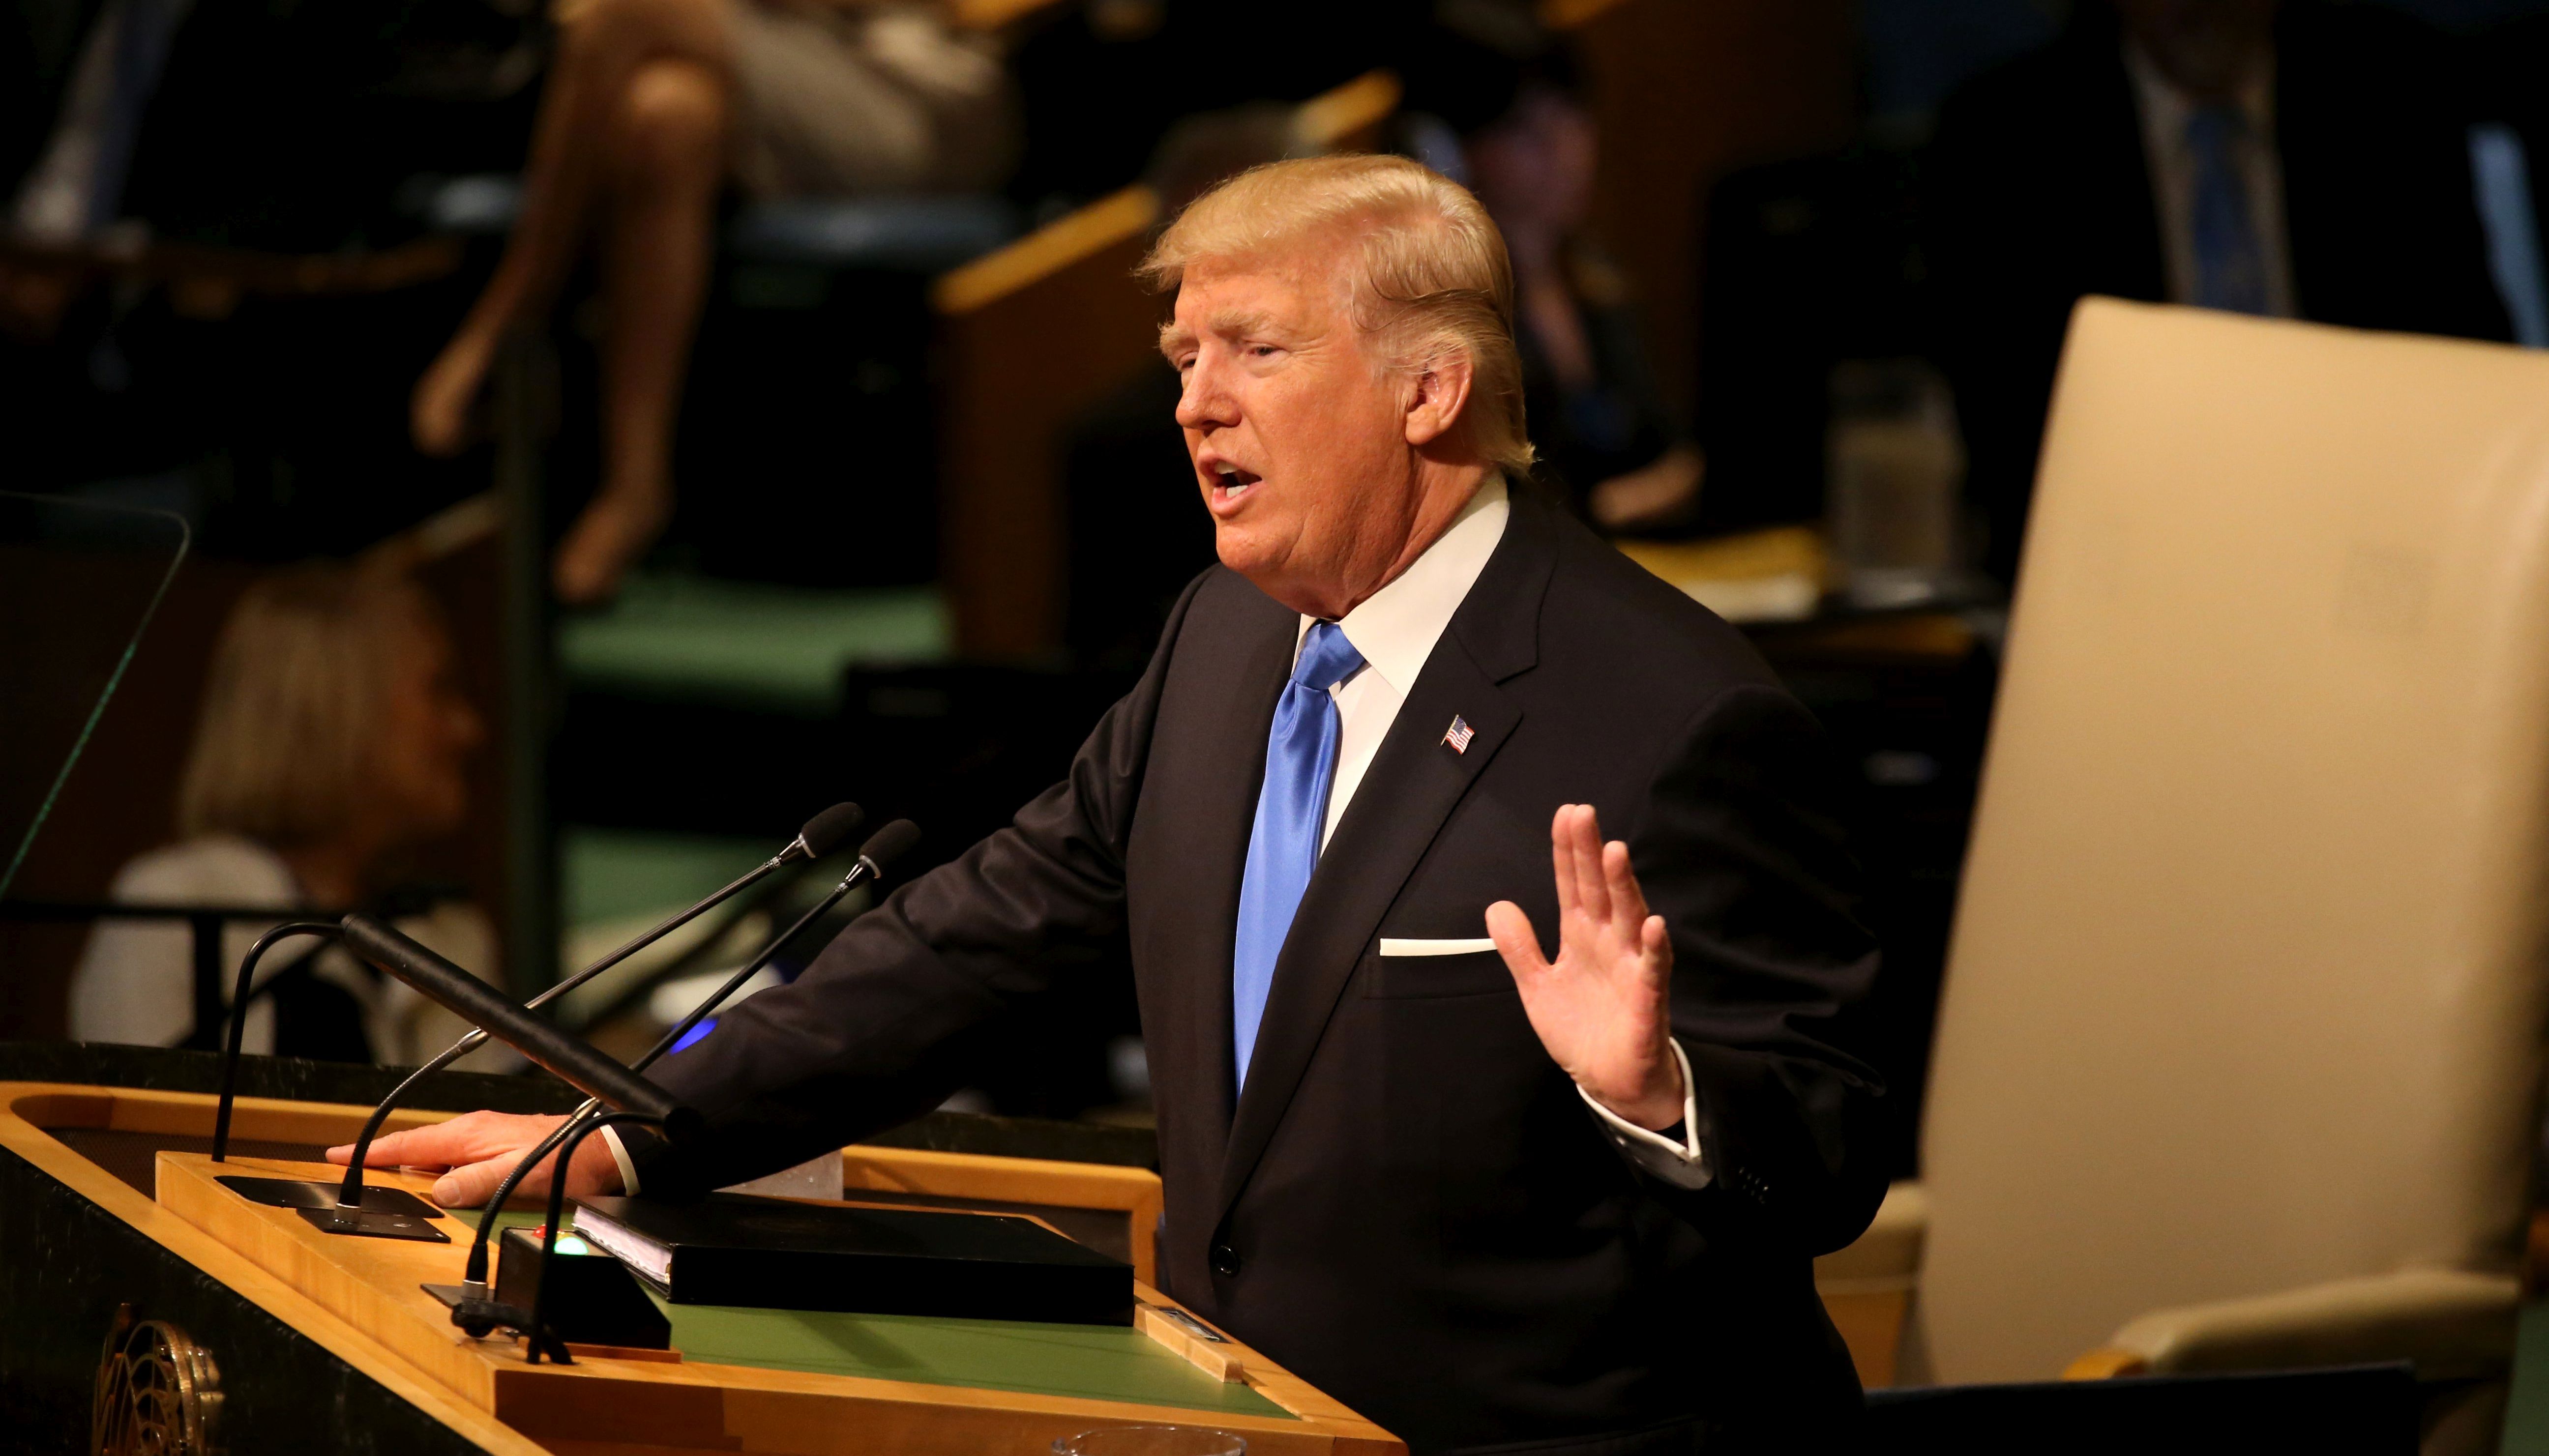 epa06213785 US President Donald J. Trump addresses the audience during the opening of the General Debate of the 72nd United Nations General Assembly at at UN headquarters in New York, New York, USA, 19 September 2017. The annual gathering of world leaders formally opens 19 September 2017, with the theme, 'Focusing on People: Striving for Peace and a Decent Life for All on a Sustainable Planet.'  EPA/PETER FOLEY